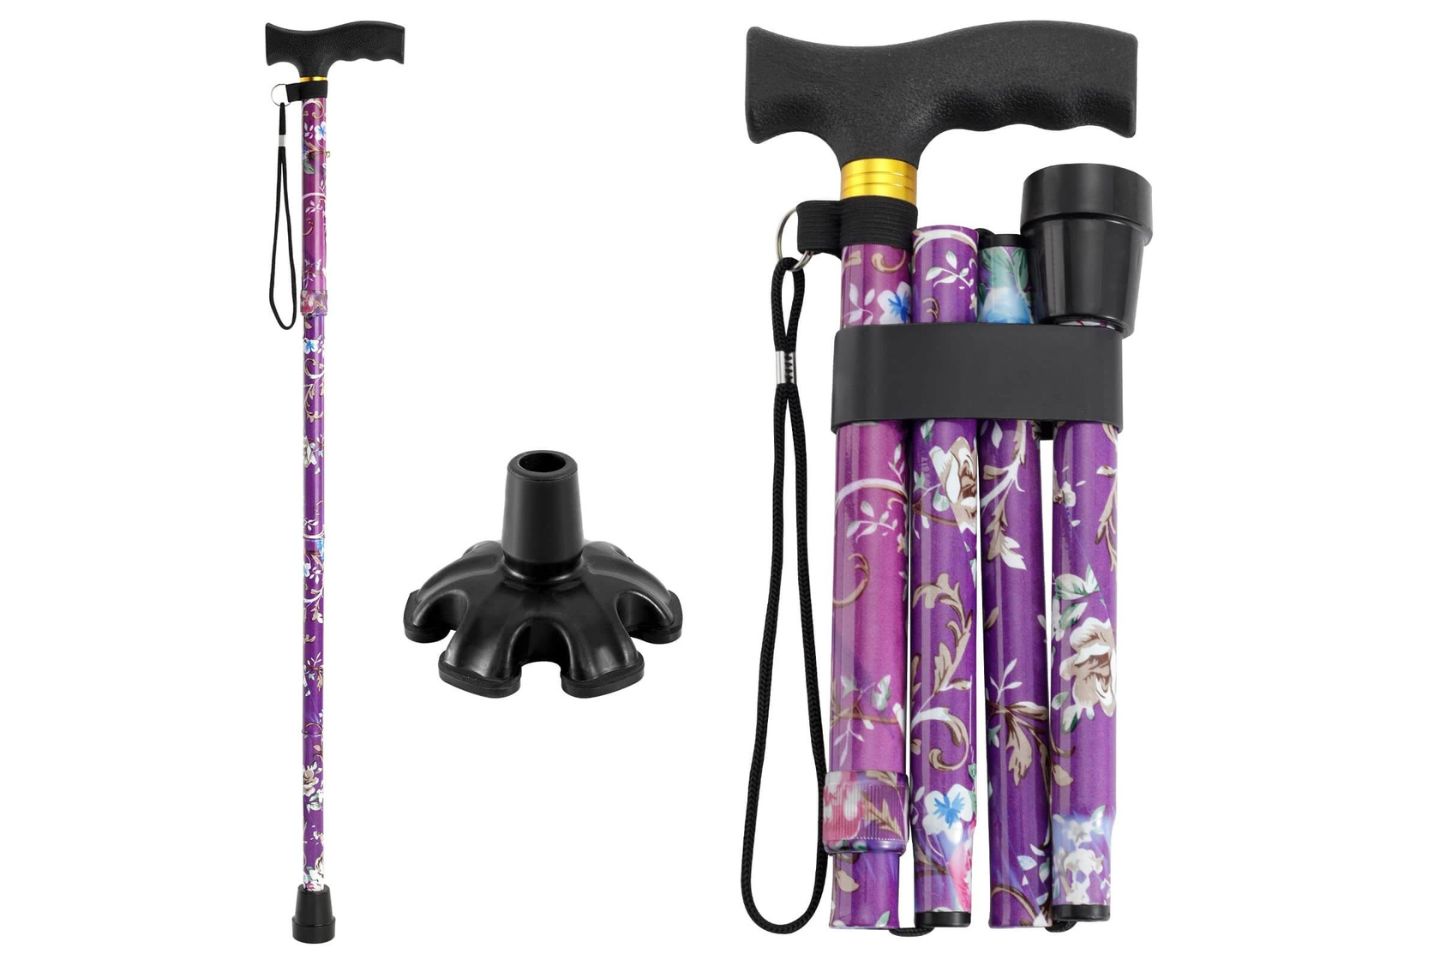 Top Five Ergonomic Walking Canes for Women - The Personal Injury Center